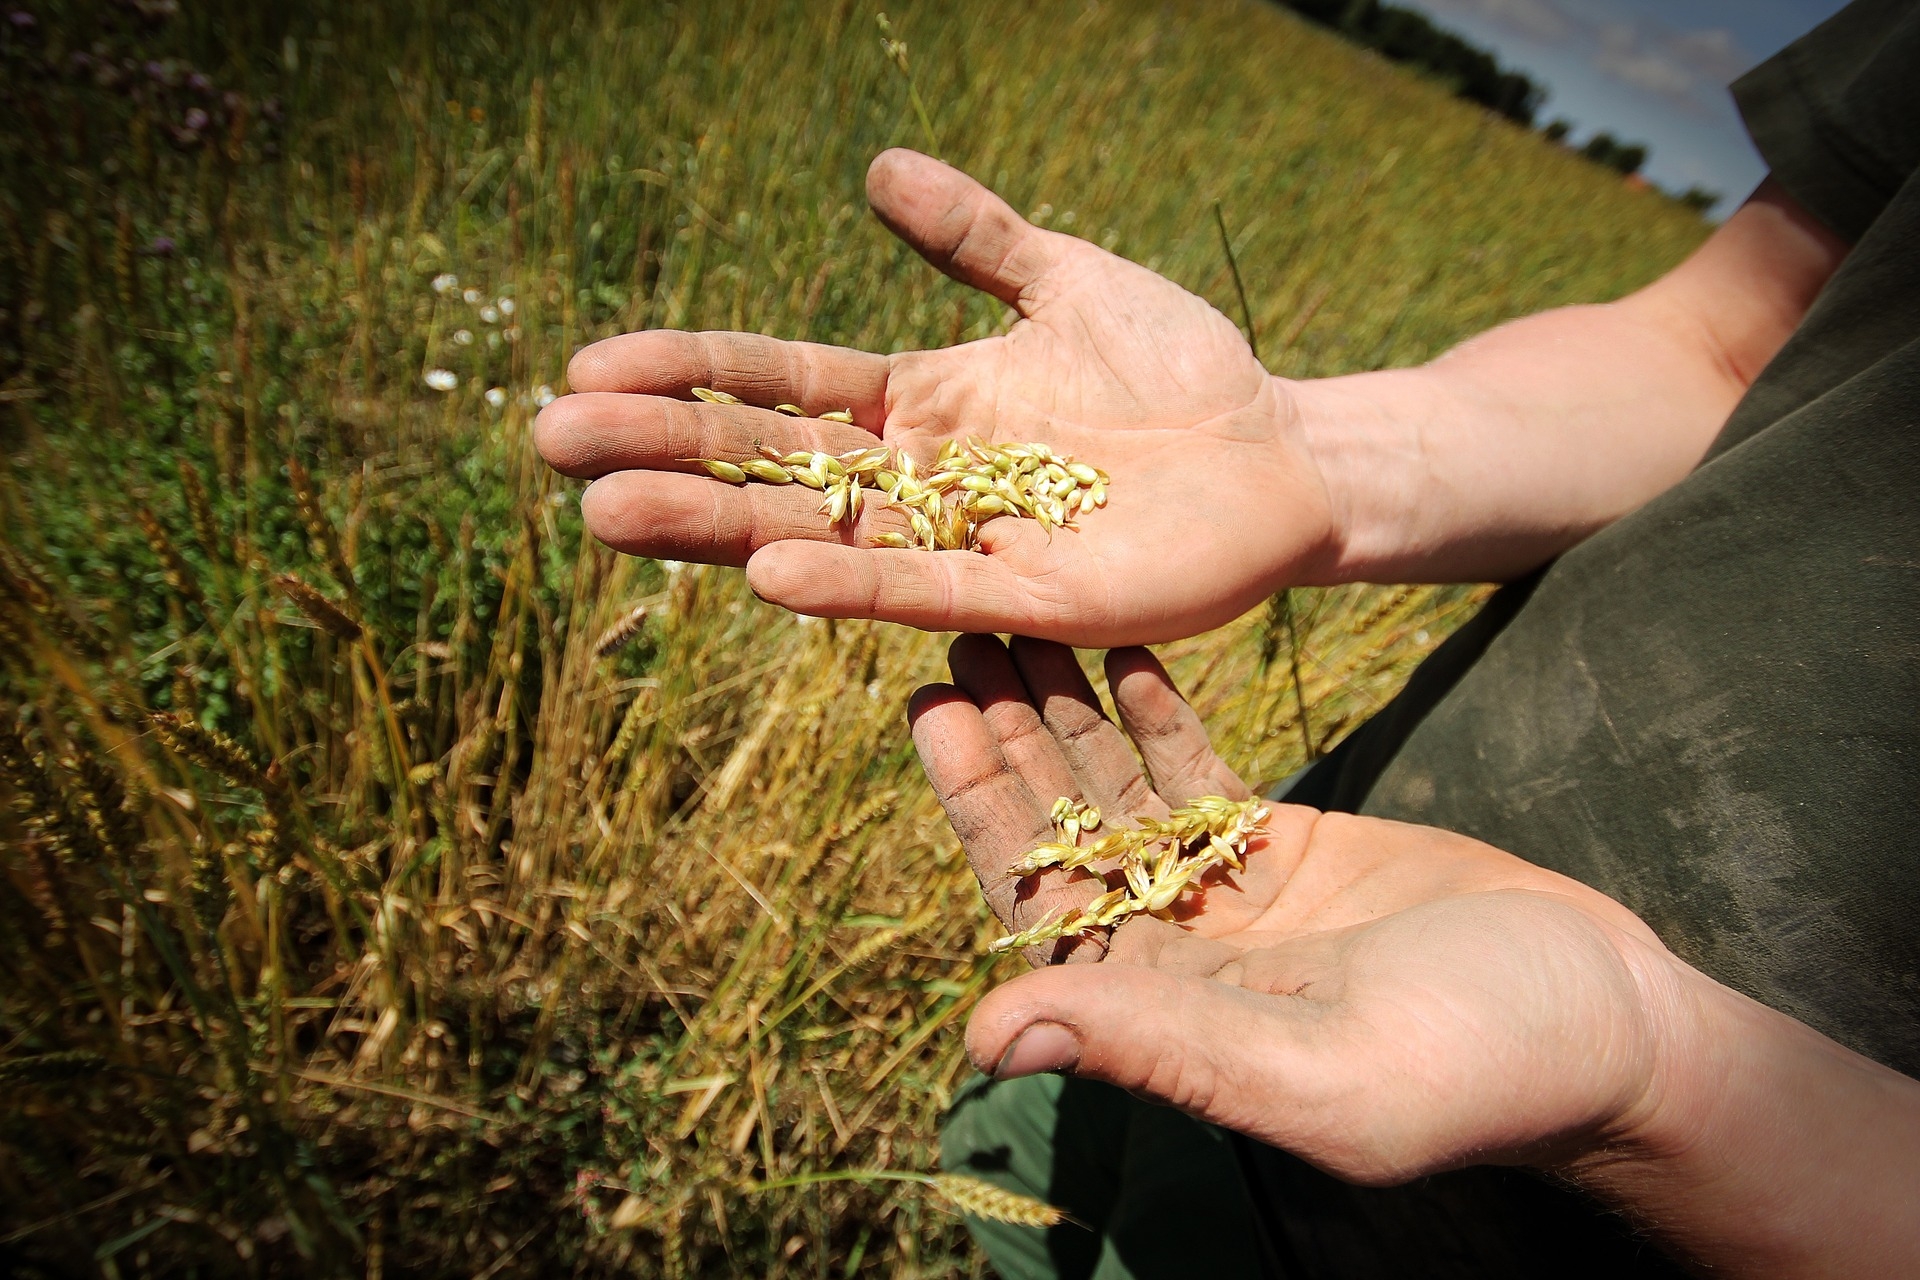 The photo shows two weather-beaten hands holding a few grains. A field with crops can be seen in the background.